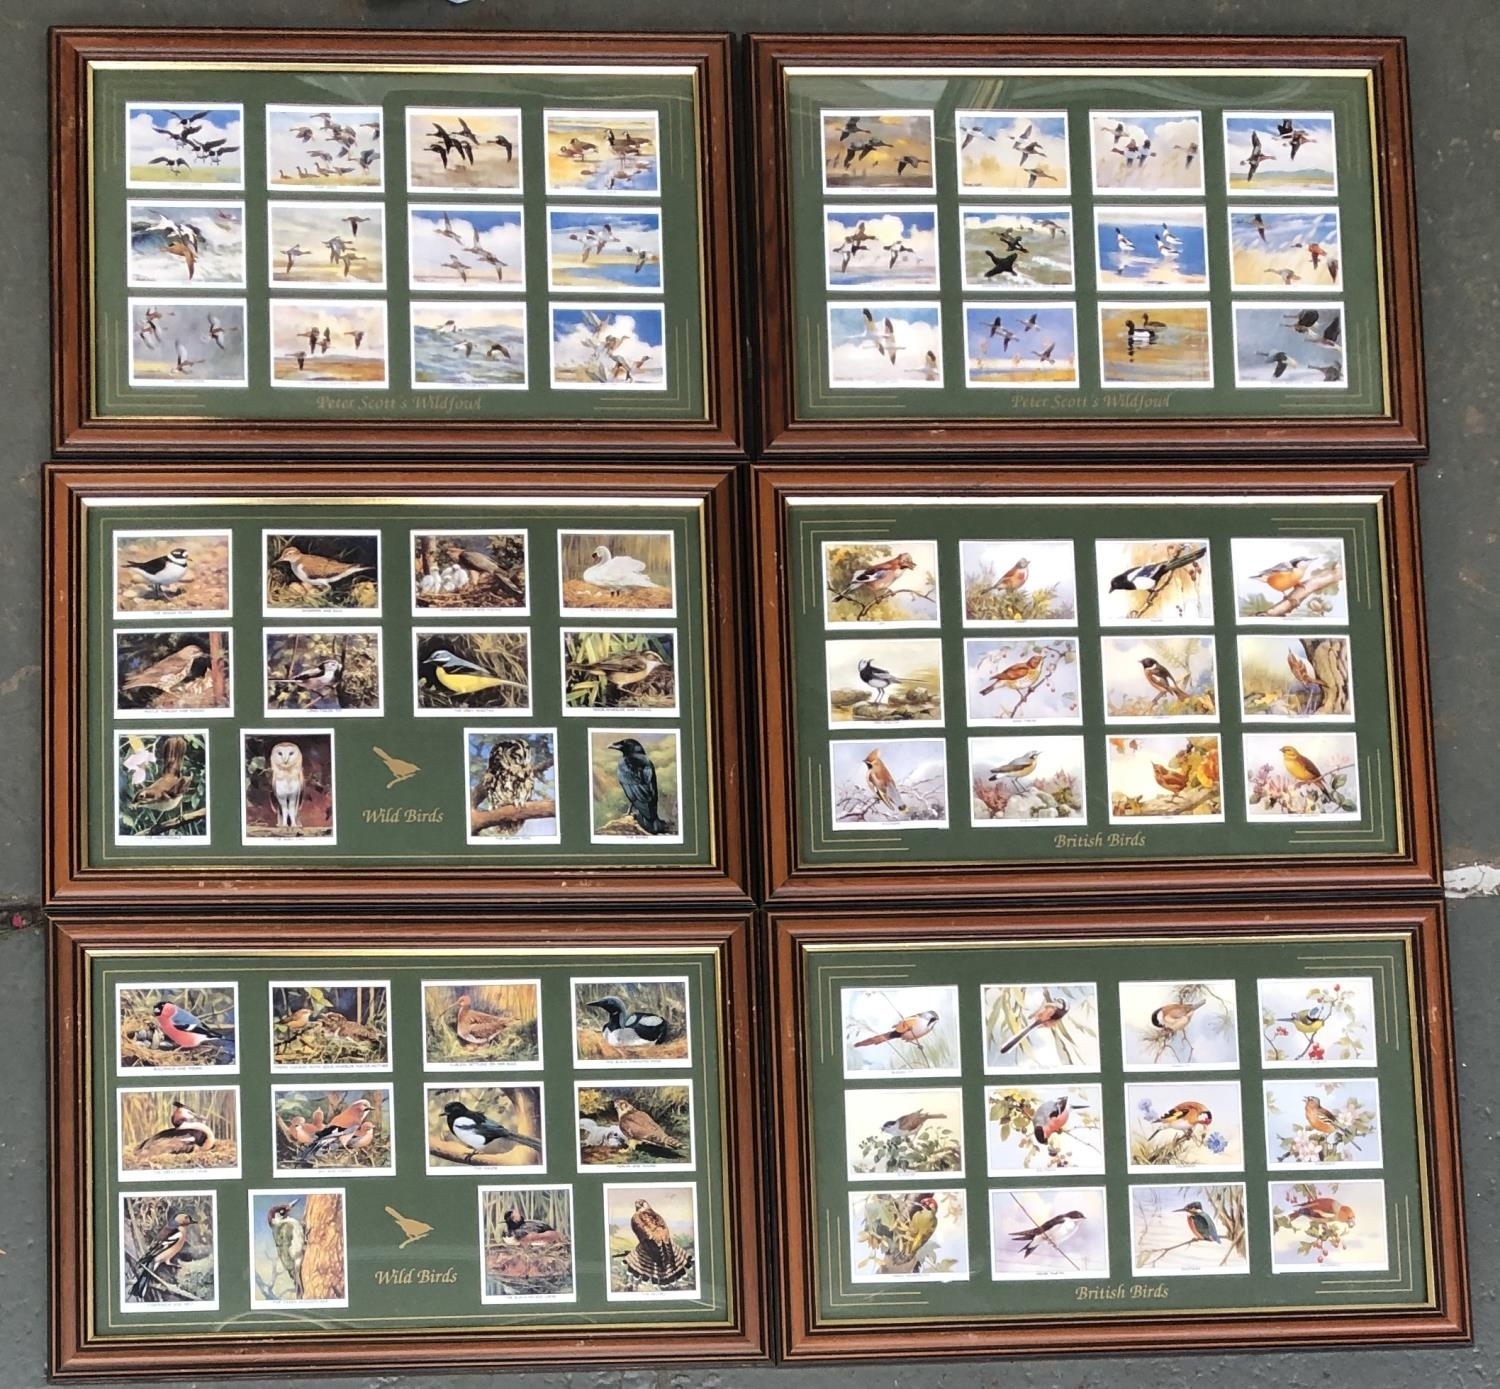 A quantity of reproduction cigarette cards, framed and glazed